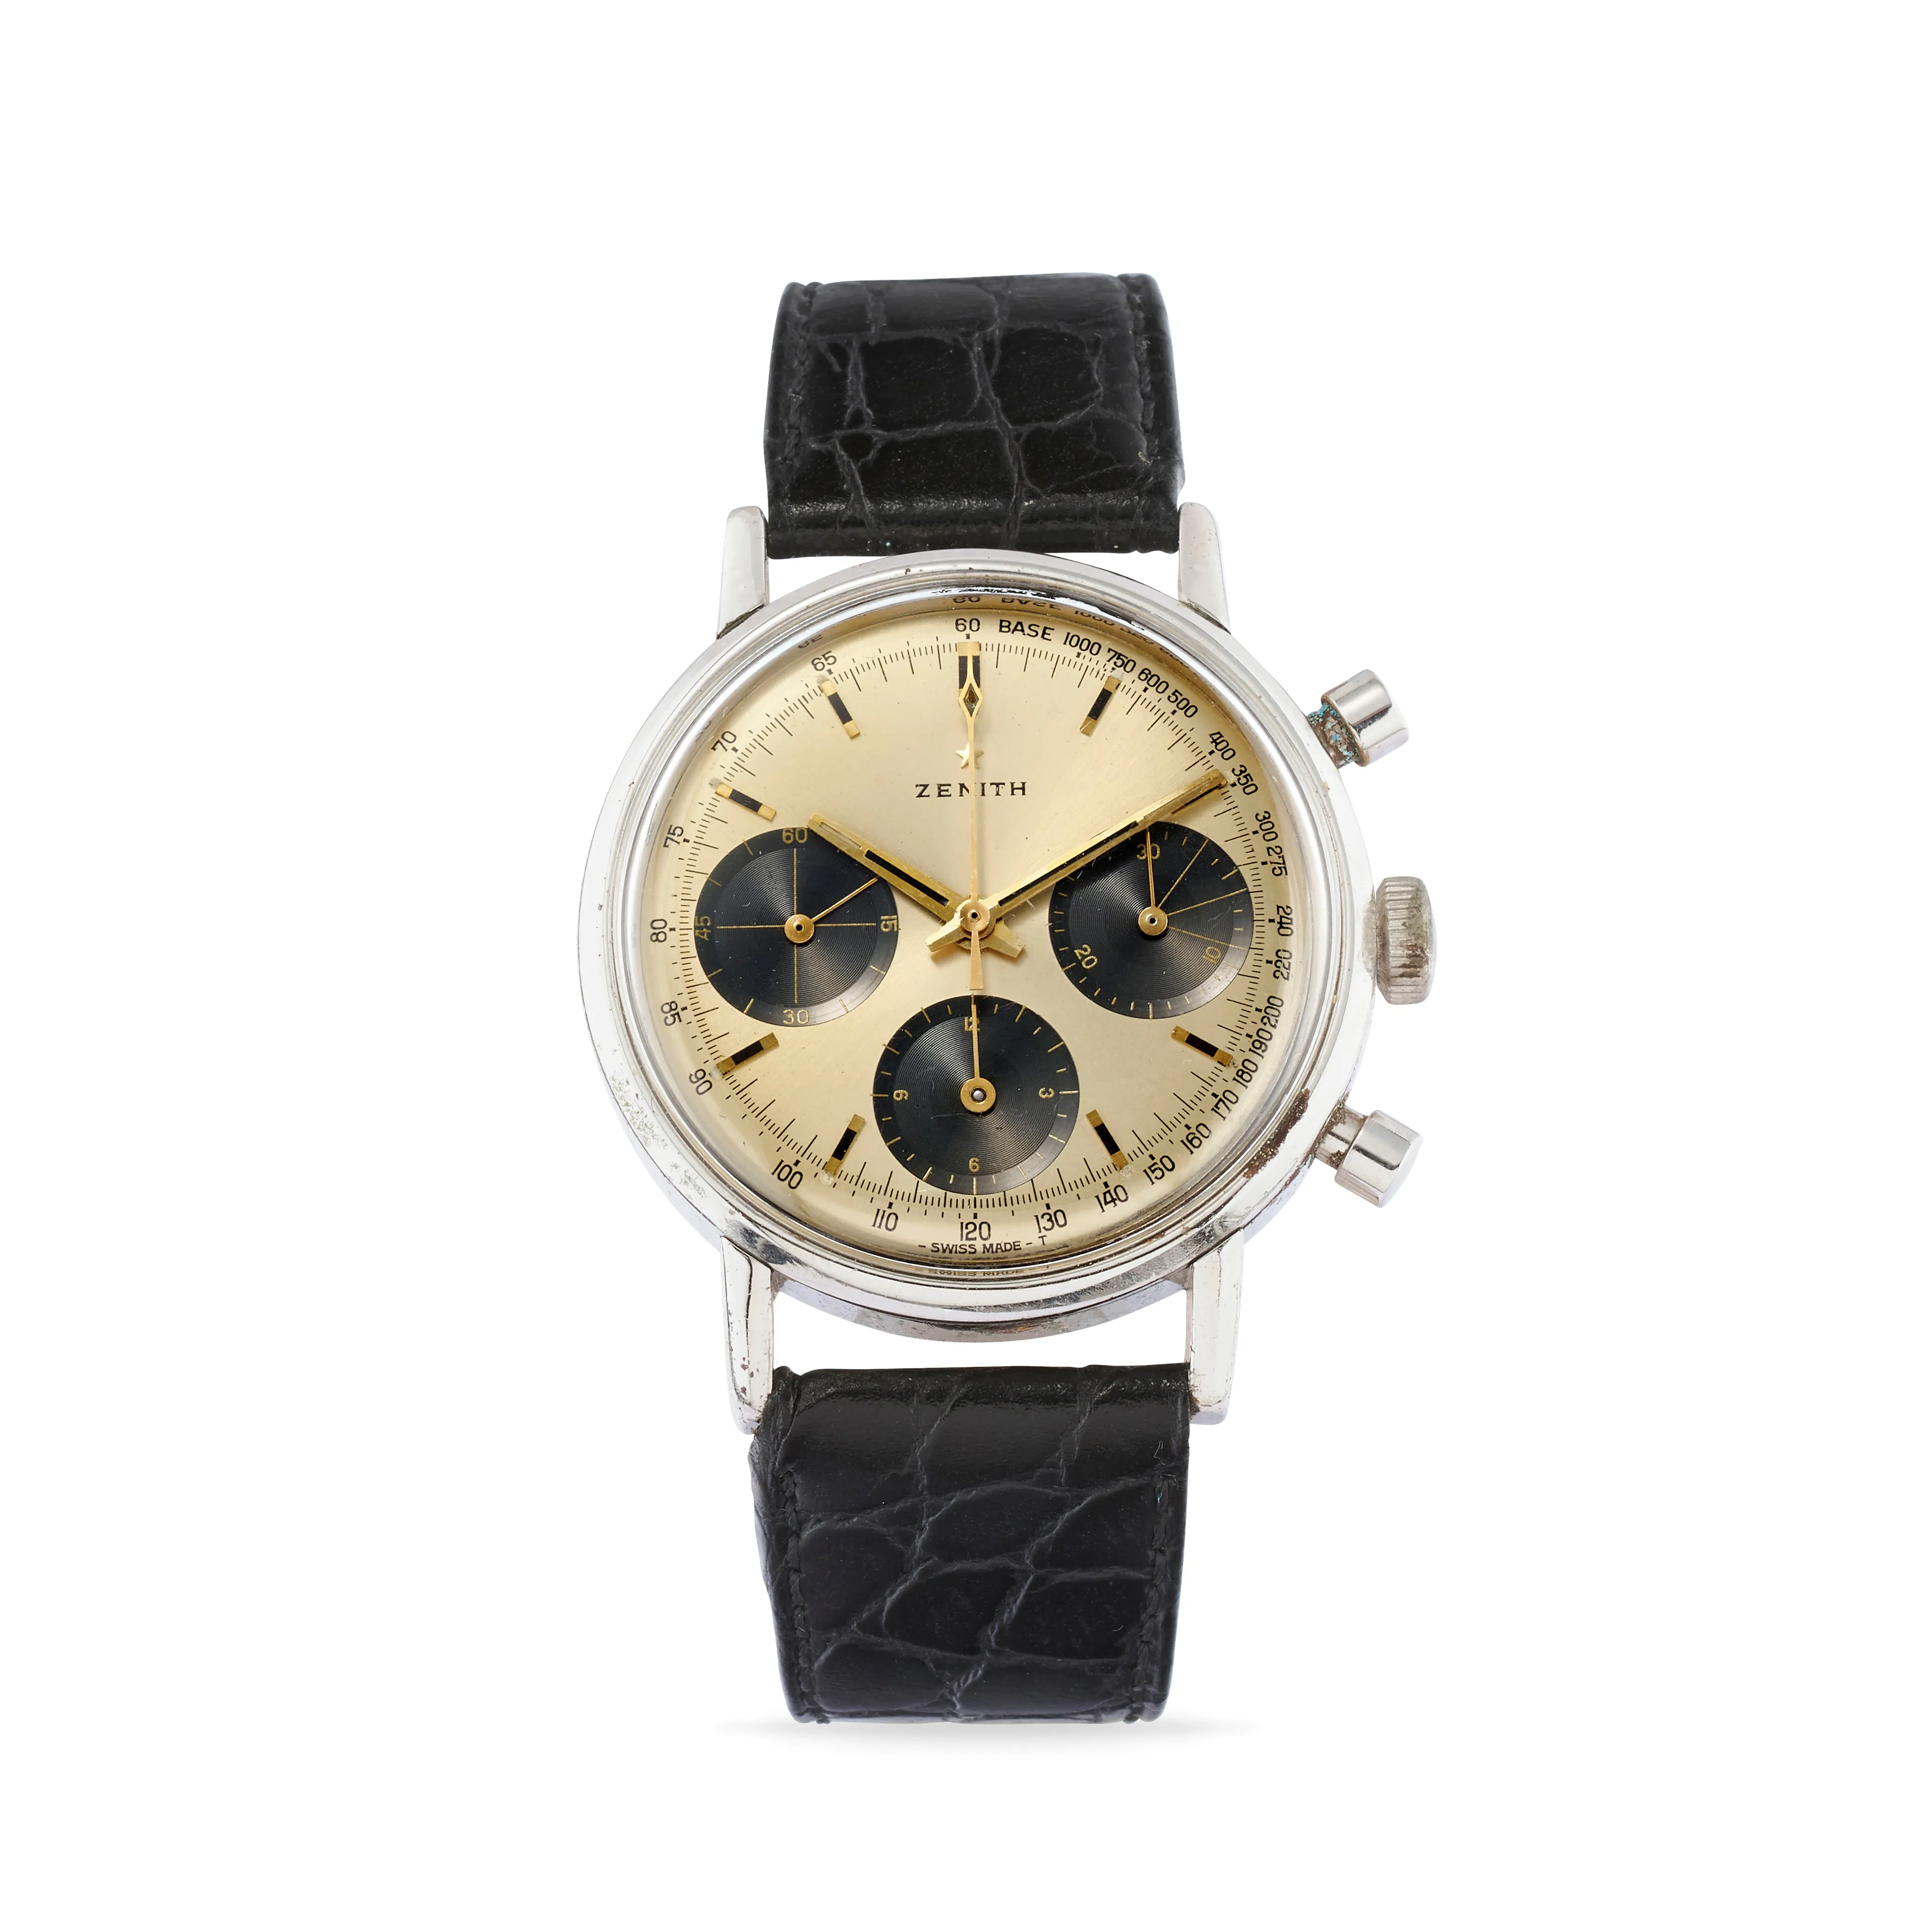 Zenith Chronograph 37mm Stainless steel Champagne